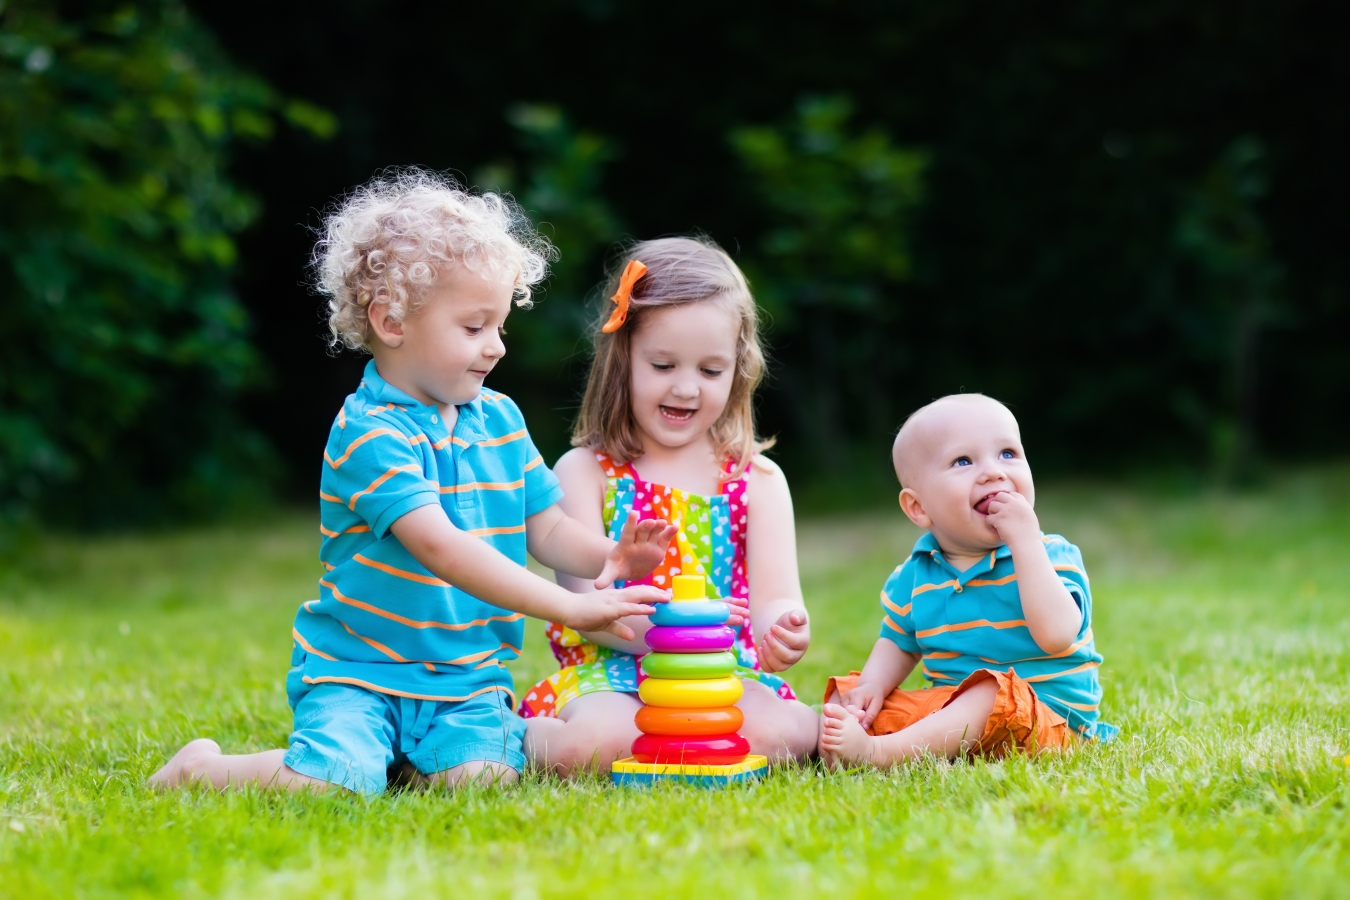 A brother and sister and their baby brother play stacking rings together on the grass